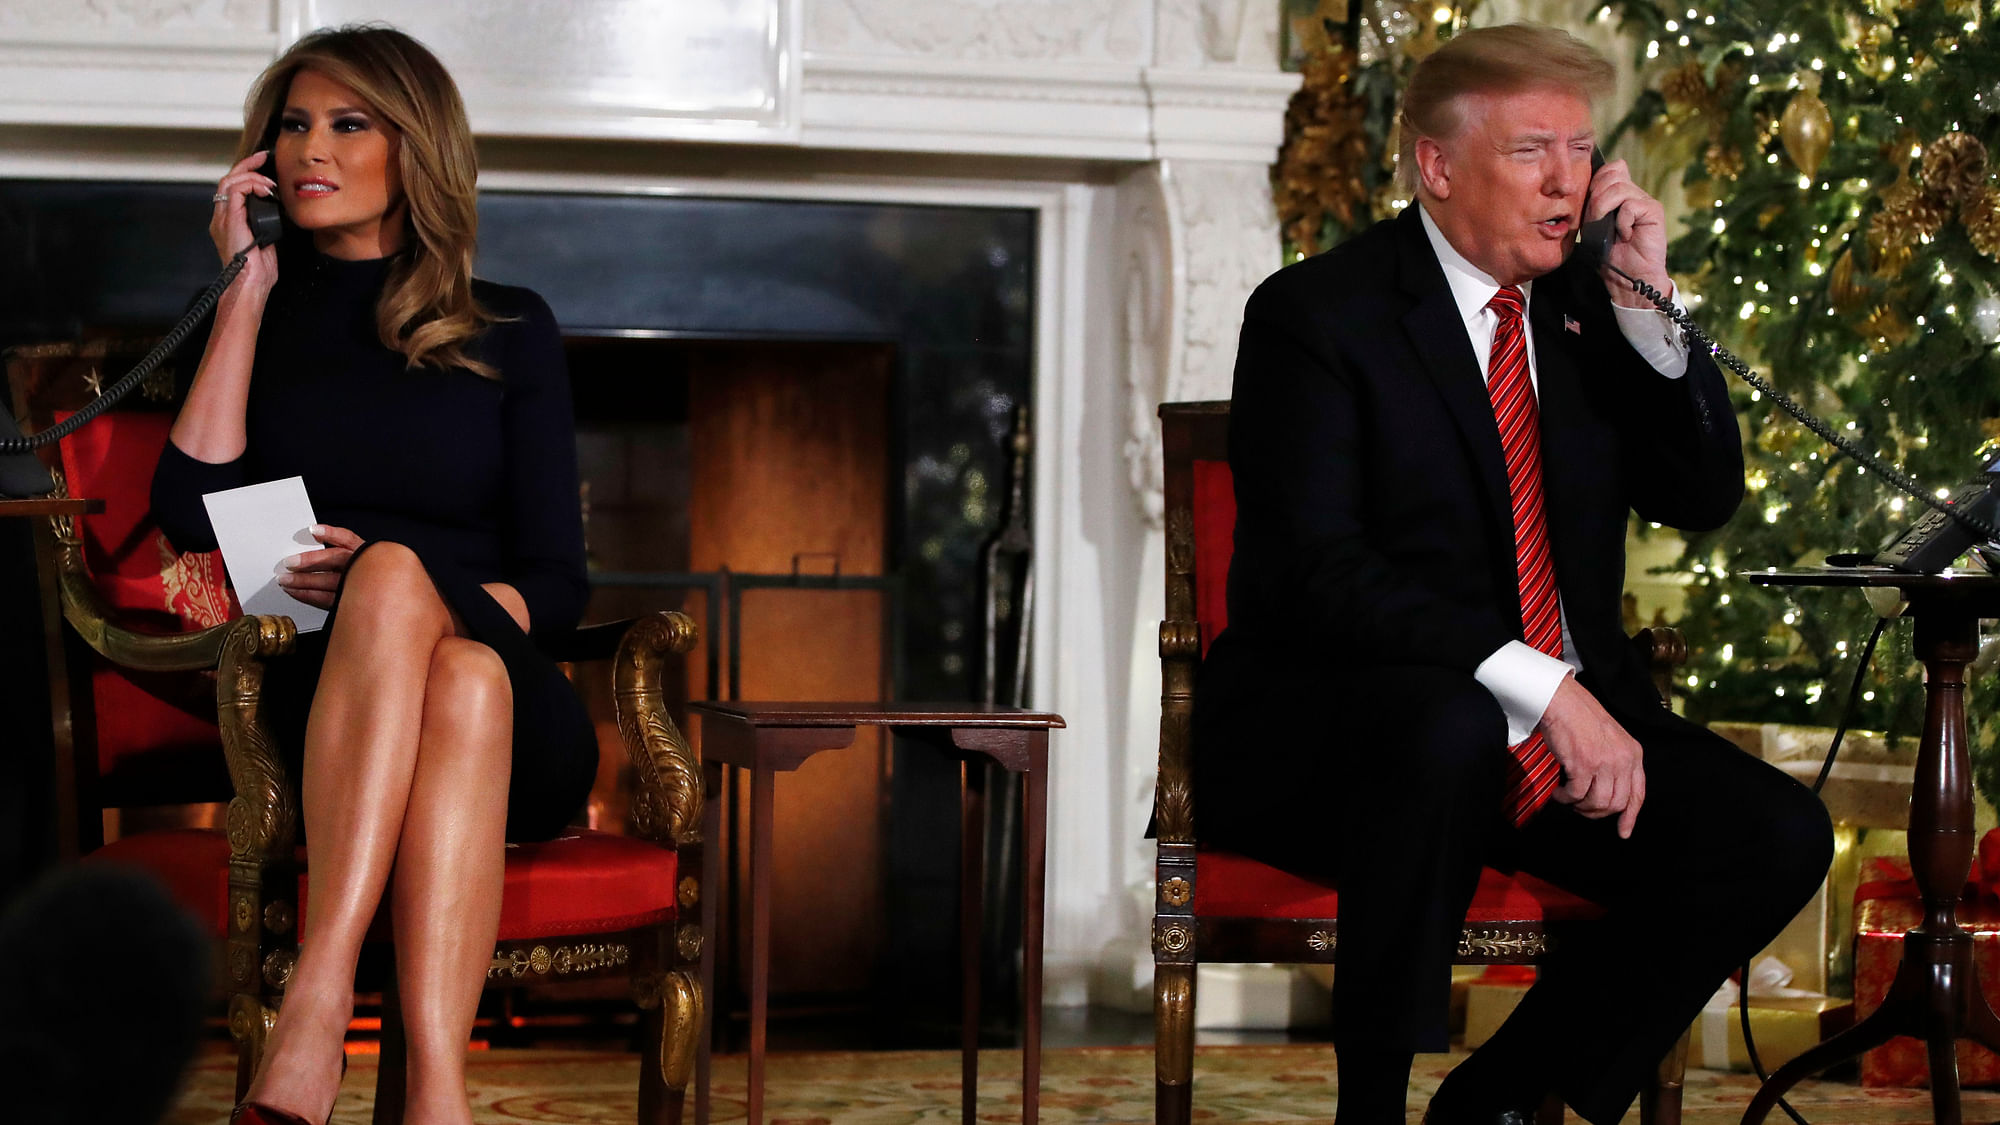 President Donald Trump and first lady Melania Trump both speak on the phone while sharing updates to track Santa’s movements from the North American Aerospace Defense Command (NORAD) Santa Tracker on Christmas Eve, Monday, 24 December.